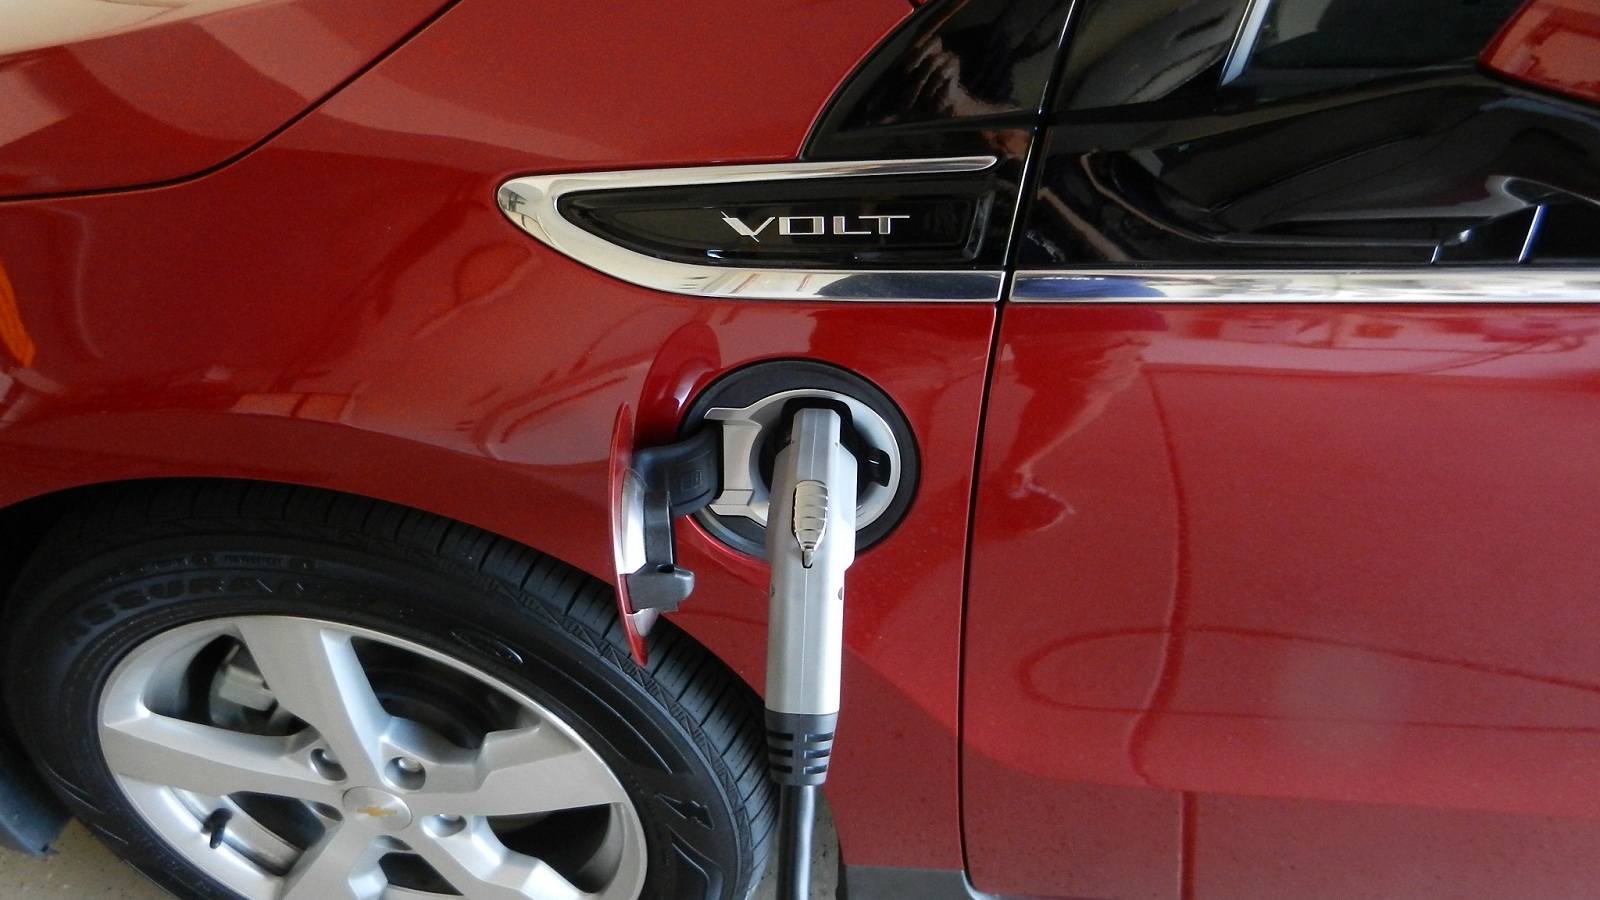 2011 Chevrolet Volt plugged into Coulomb Technologies 240V wall charging unit